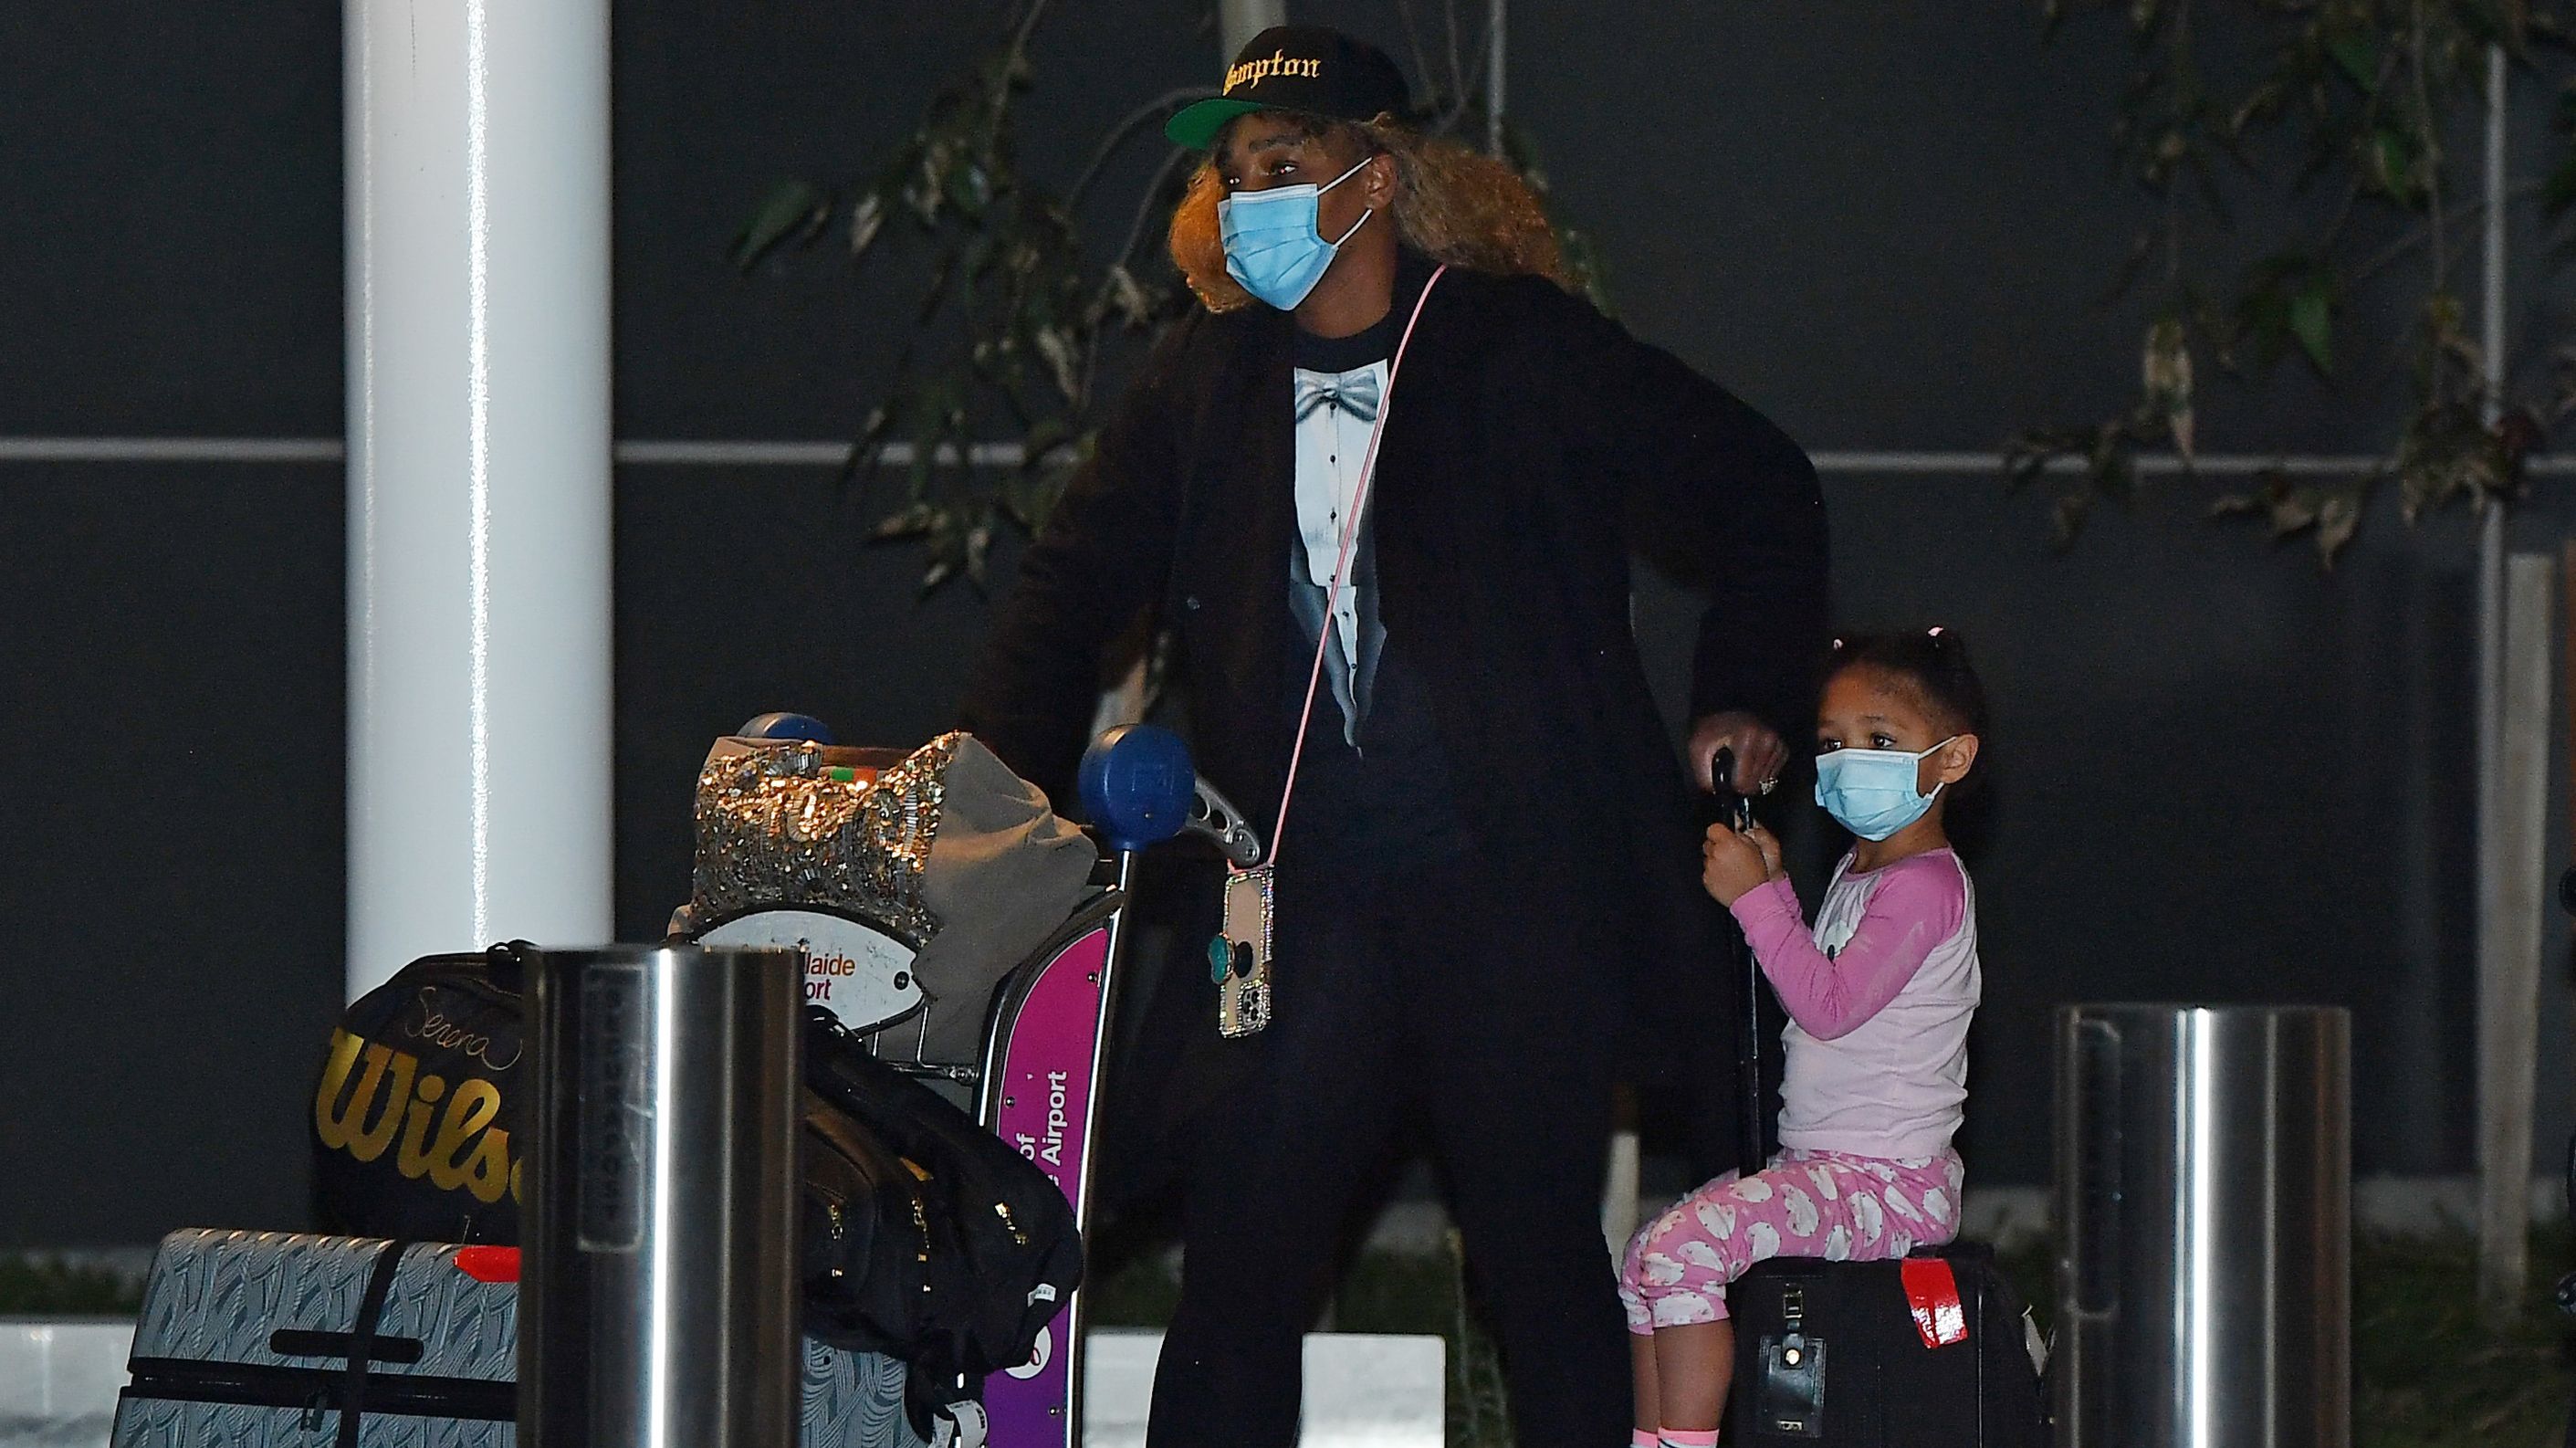 Serena Williams with her daughter Alexis Olympia Ohanian Jr. arrives at Adelaide Airport.